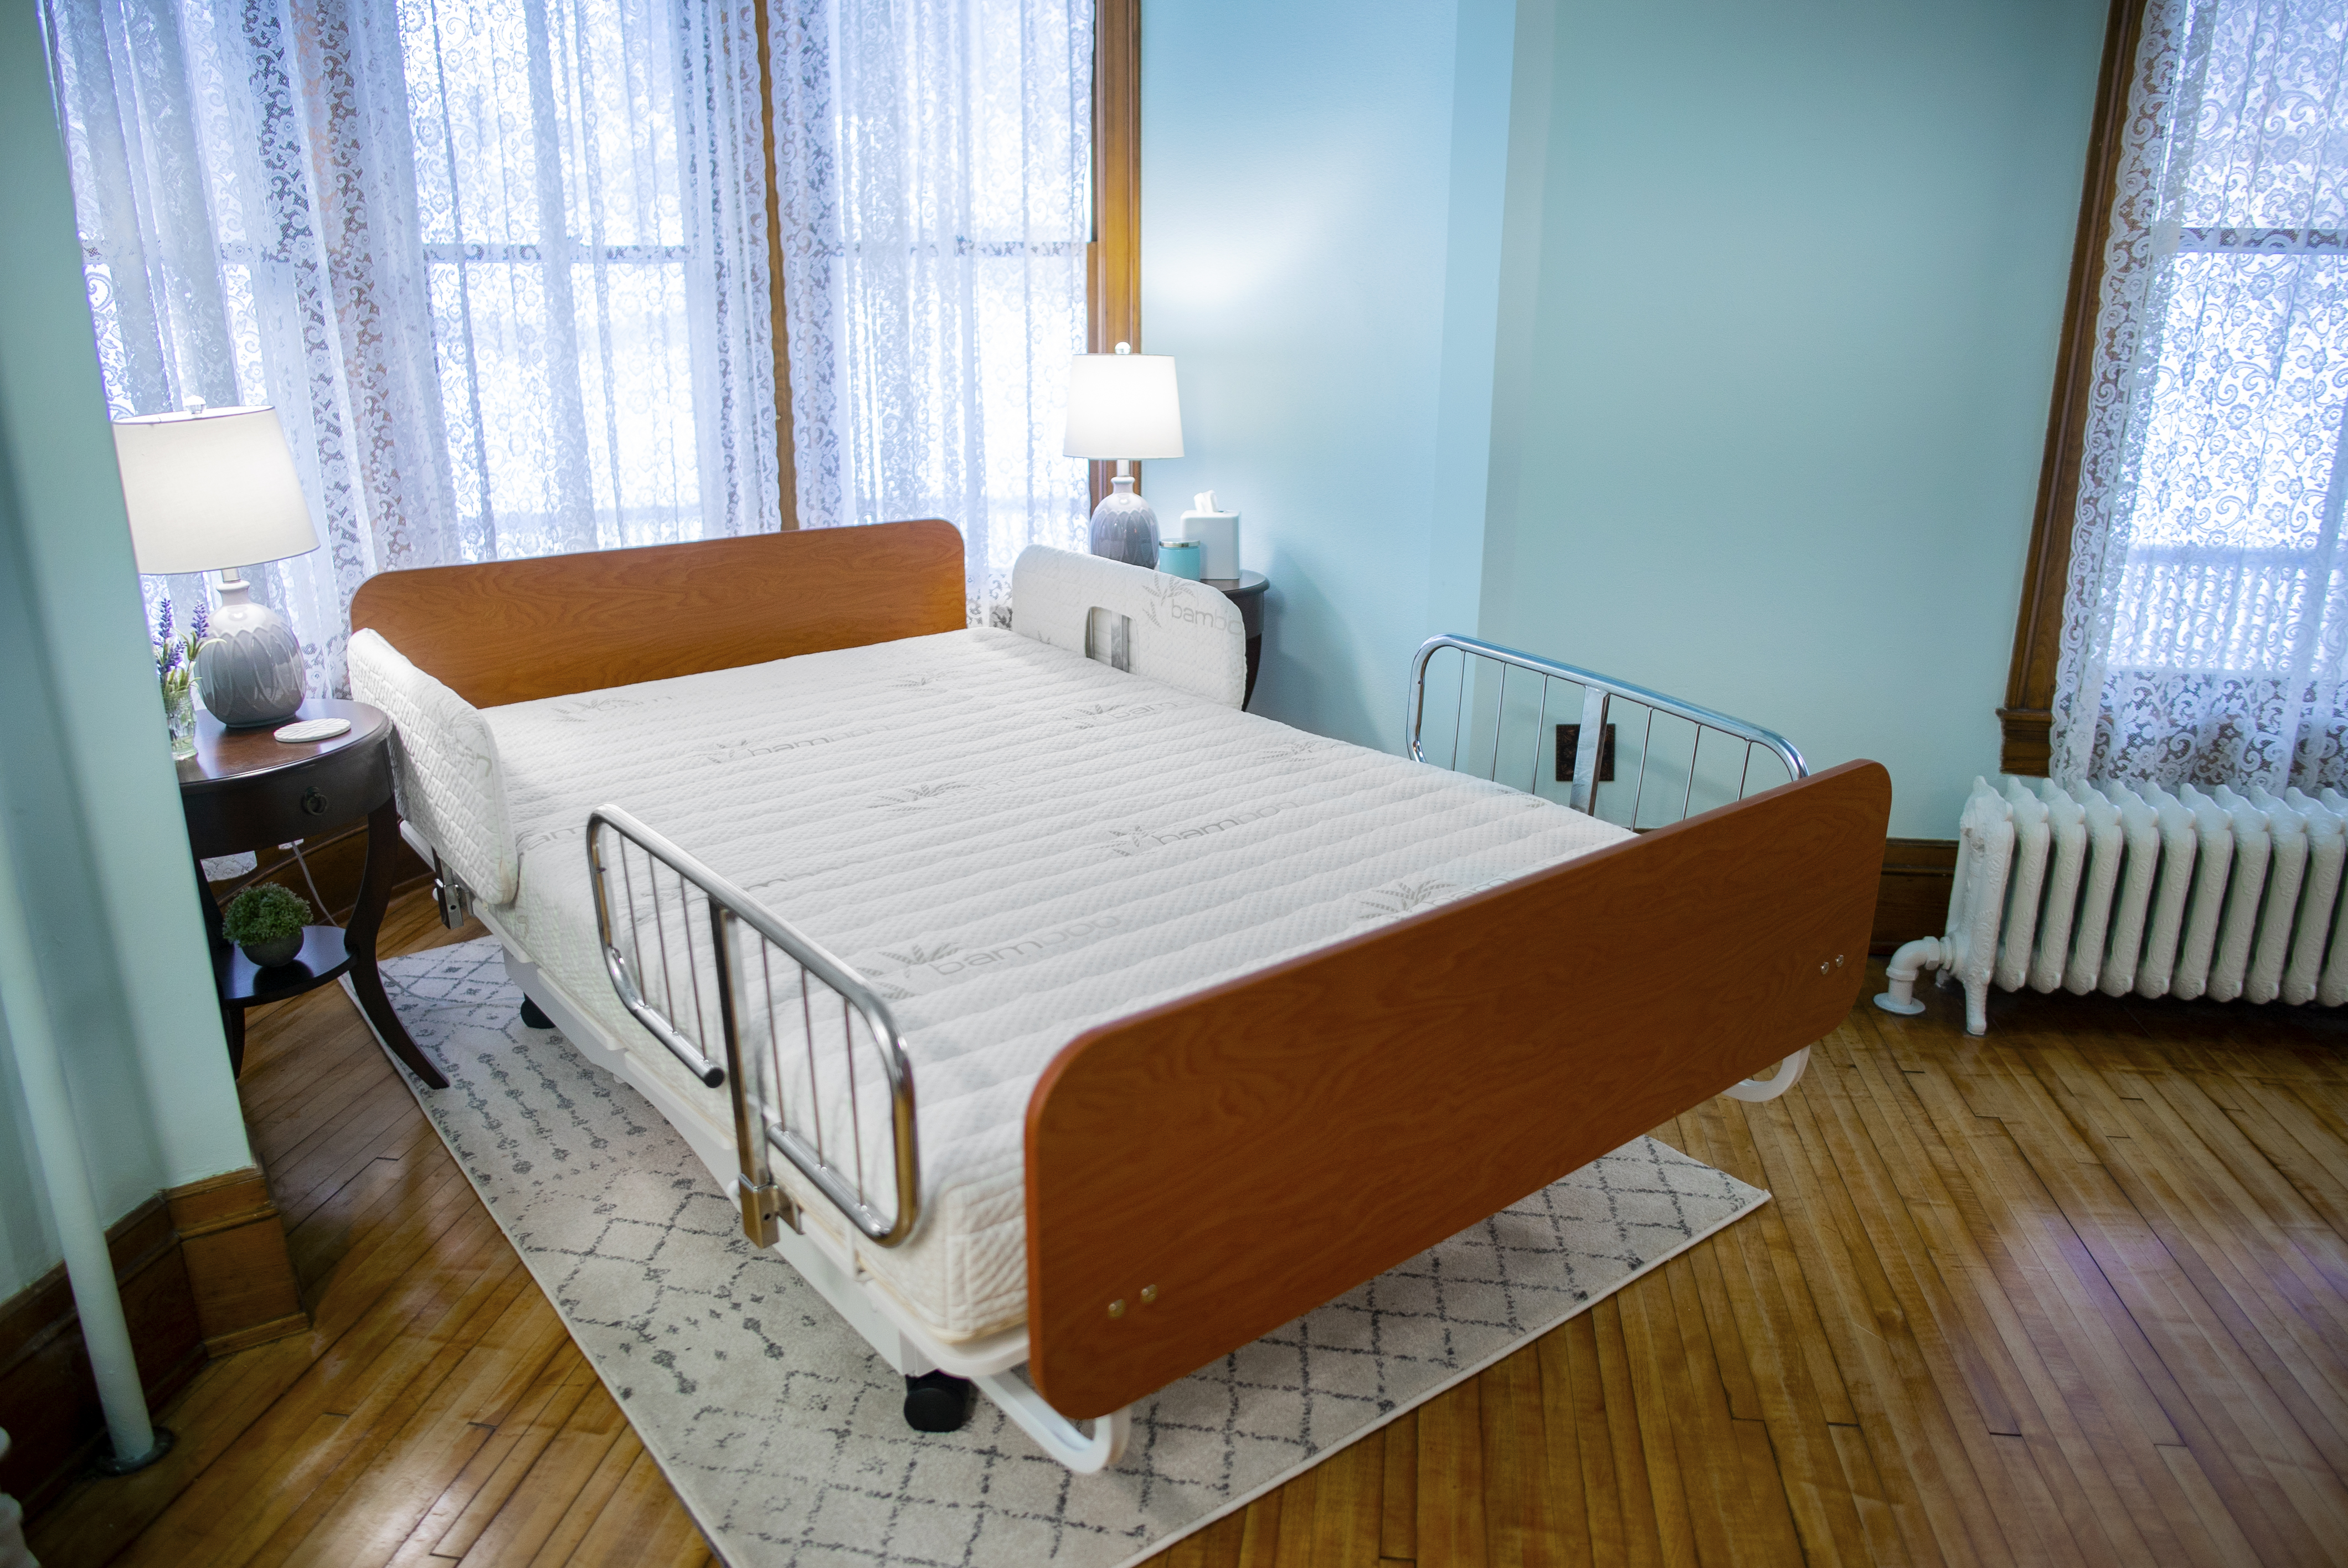 How To Prevent Your Bed From Sliding On Wood Floor